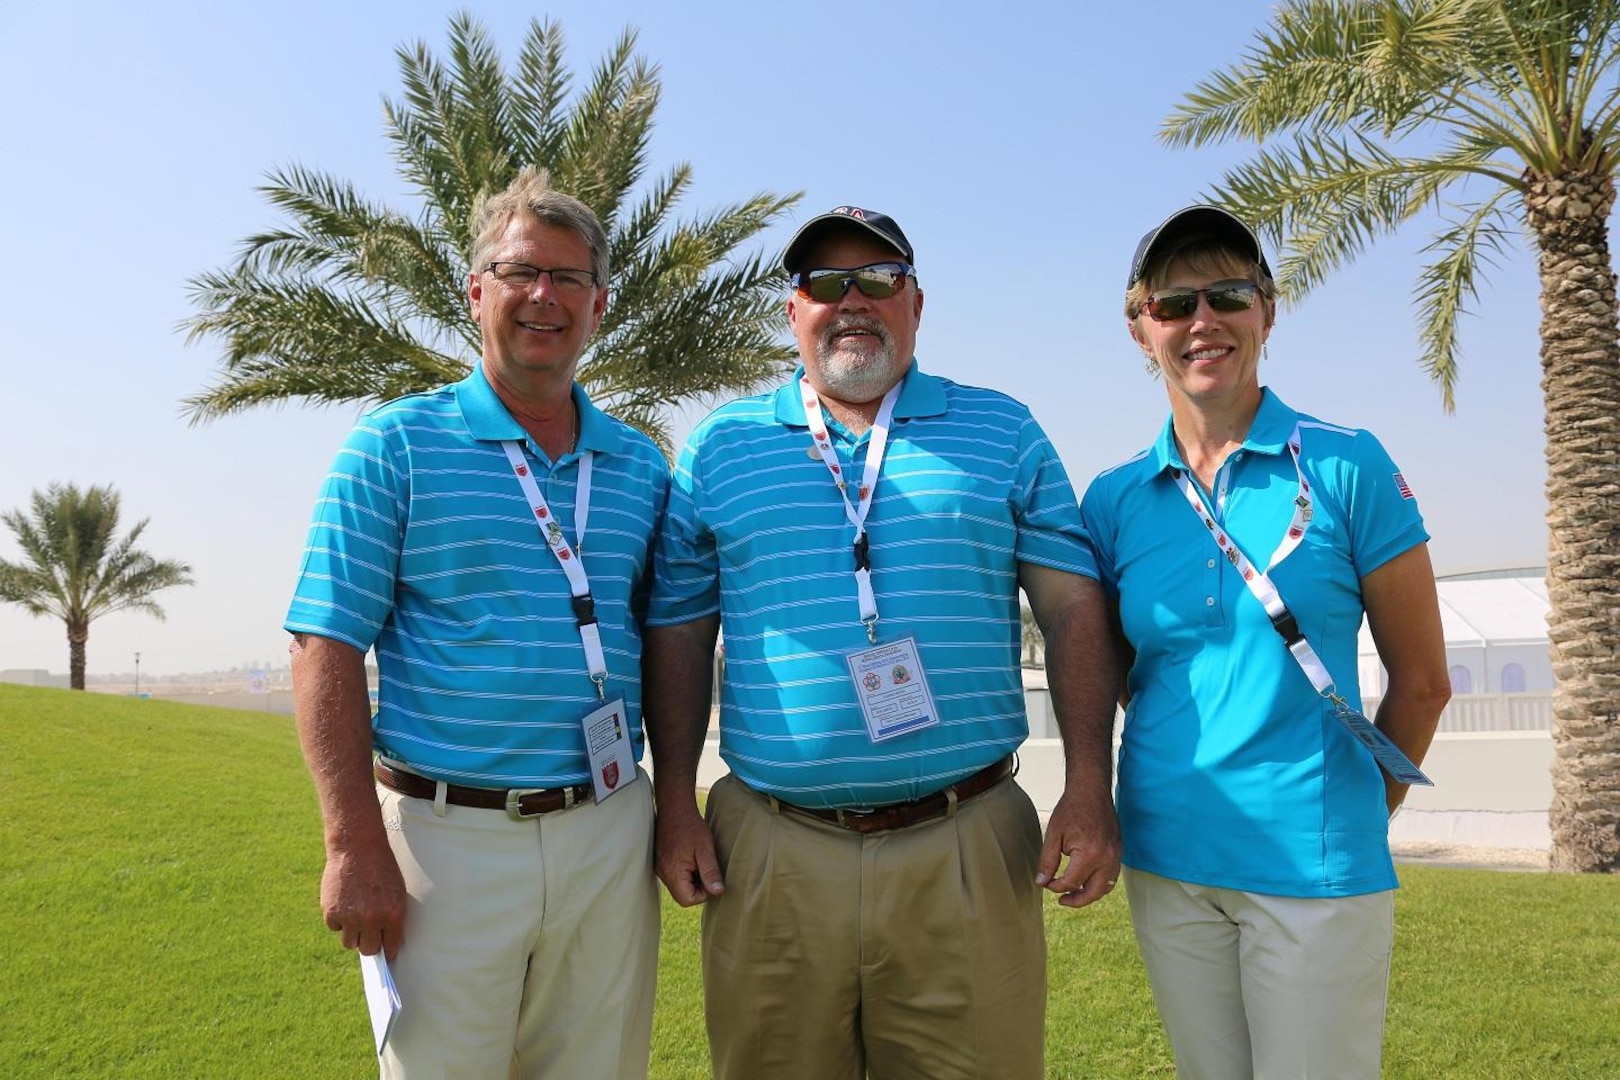 The US Armed Forces Golf team leadership from left to right: Coach - Mr. Doug Quirie (USAF); Team Captain - Mr. James Senn (Navy Sports Director); and Chief of Mission - CAPT Lisa Potvin (Navy).  The US Men and Women Armed Forces Golf teams won respective gold medals for the seventh time during the 8th CISM World Military Golf Championship held in Bahrain 13-21 November 2014.